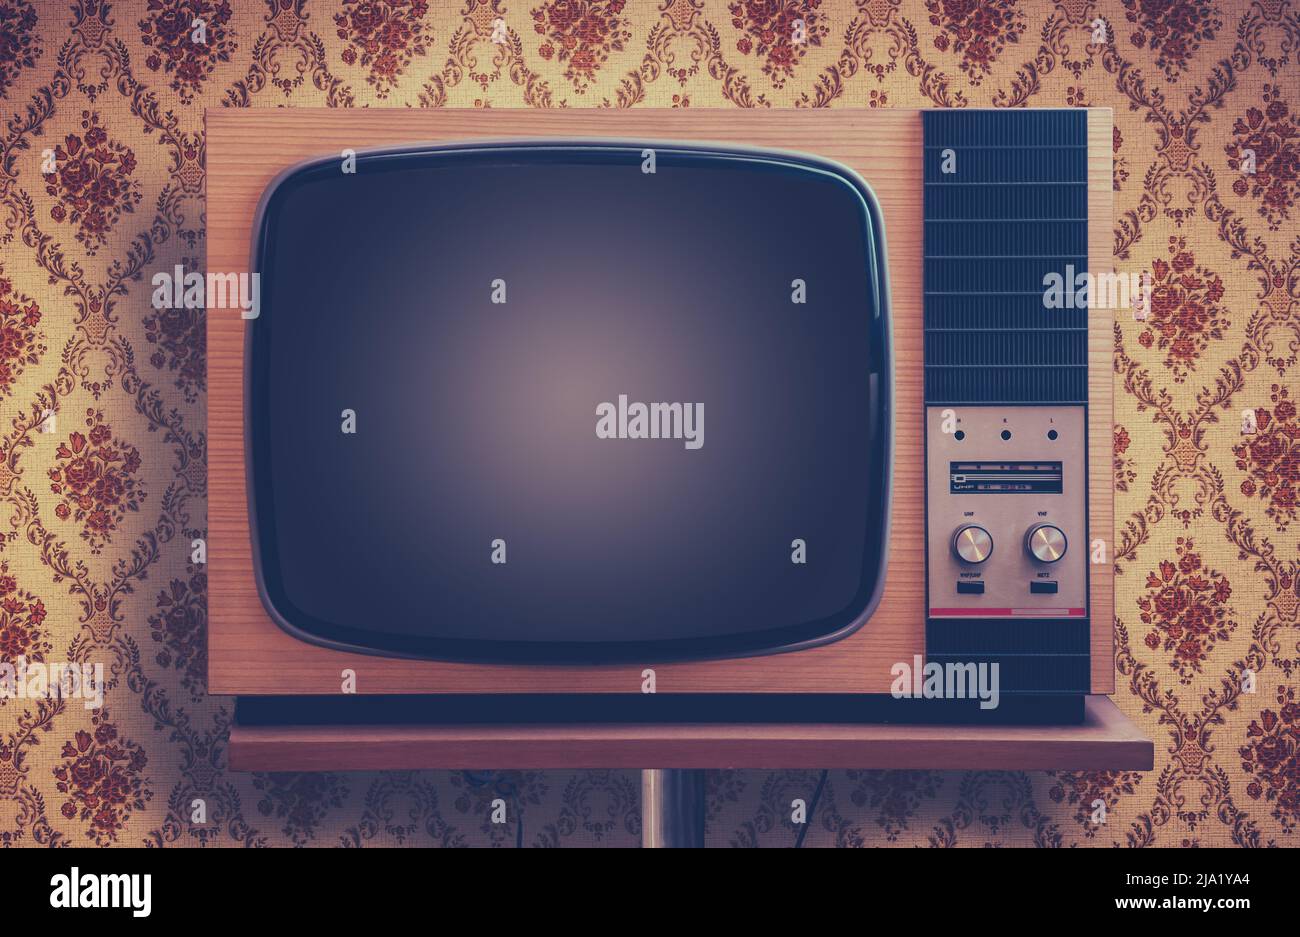 Retro TV In A Room With Ugly 1970s Vintage Wallpaper Stock Photo